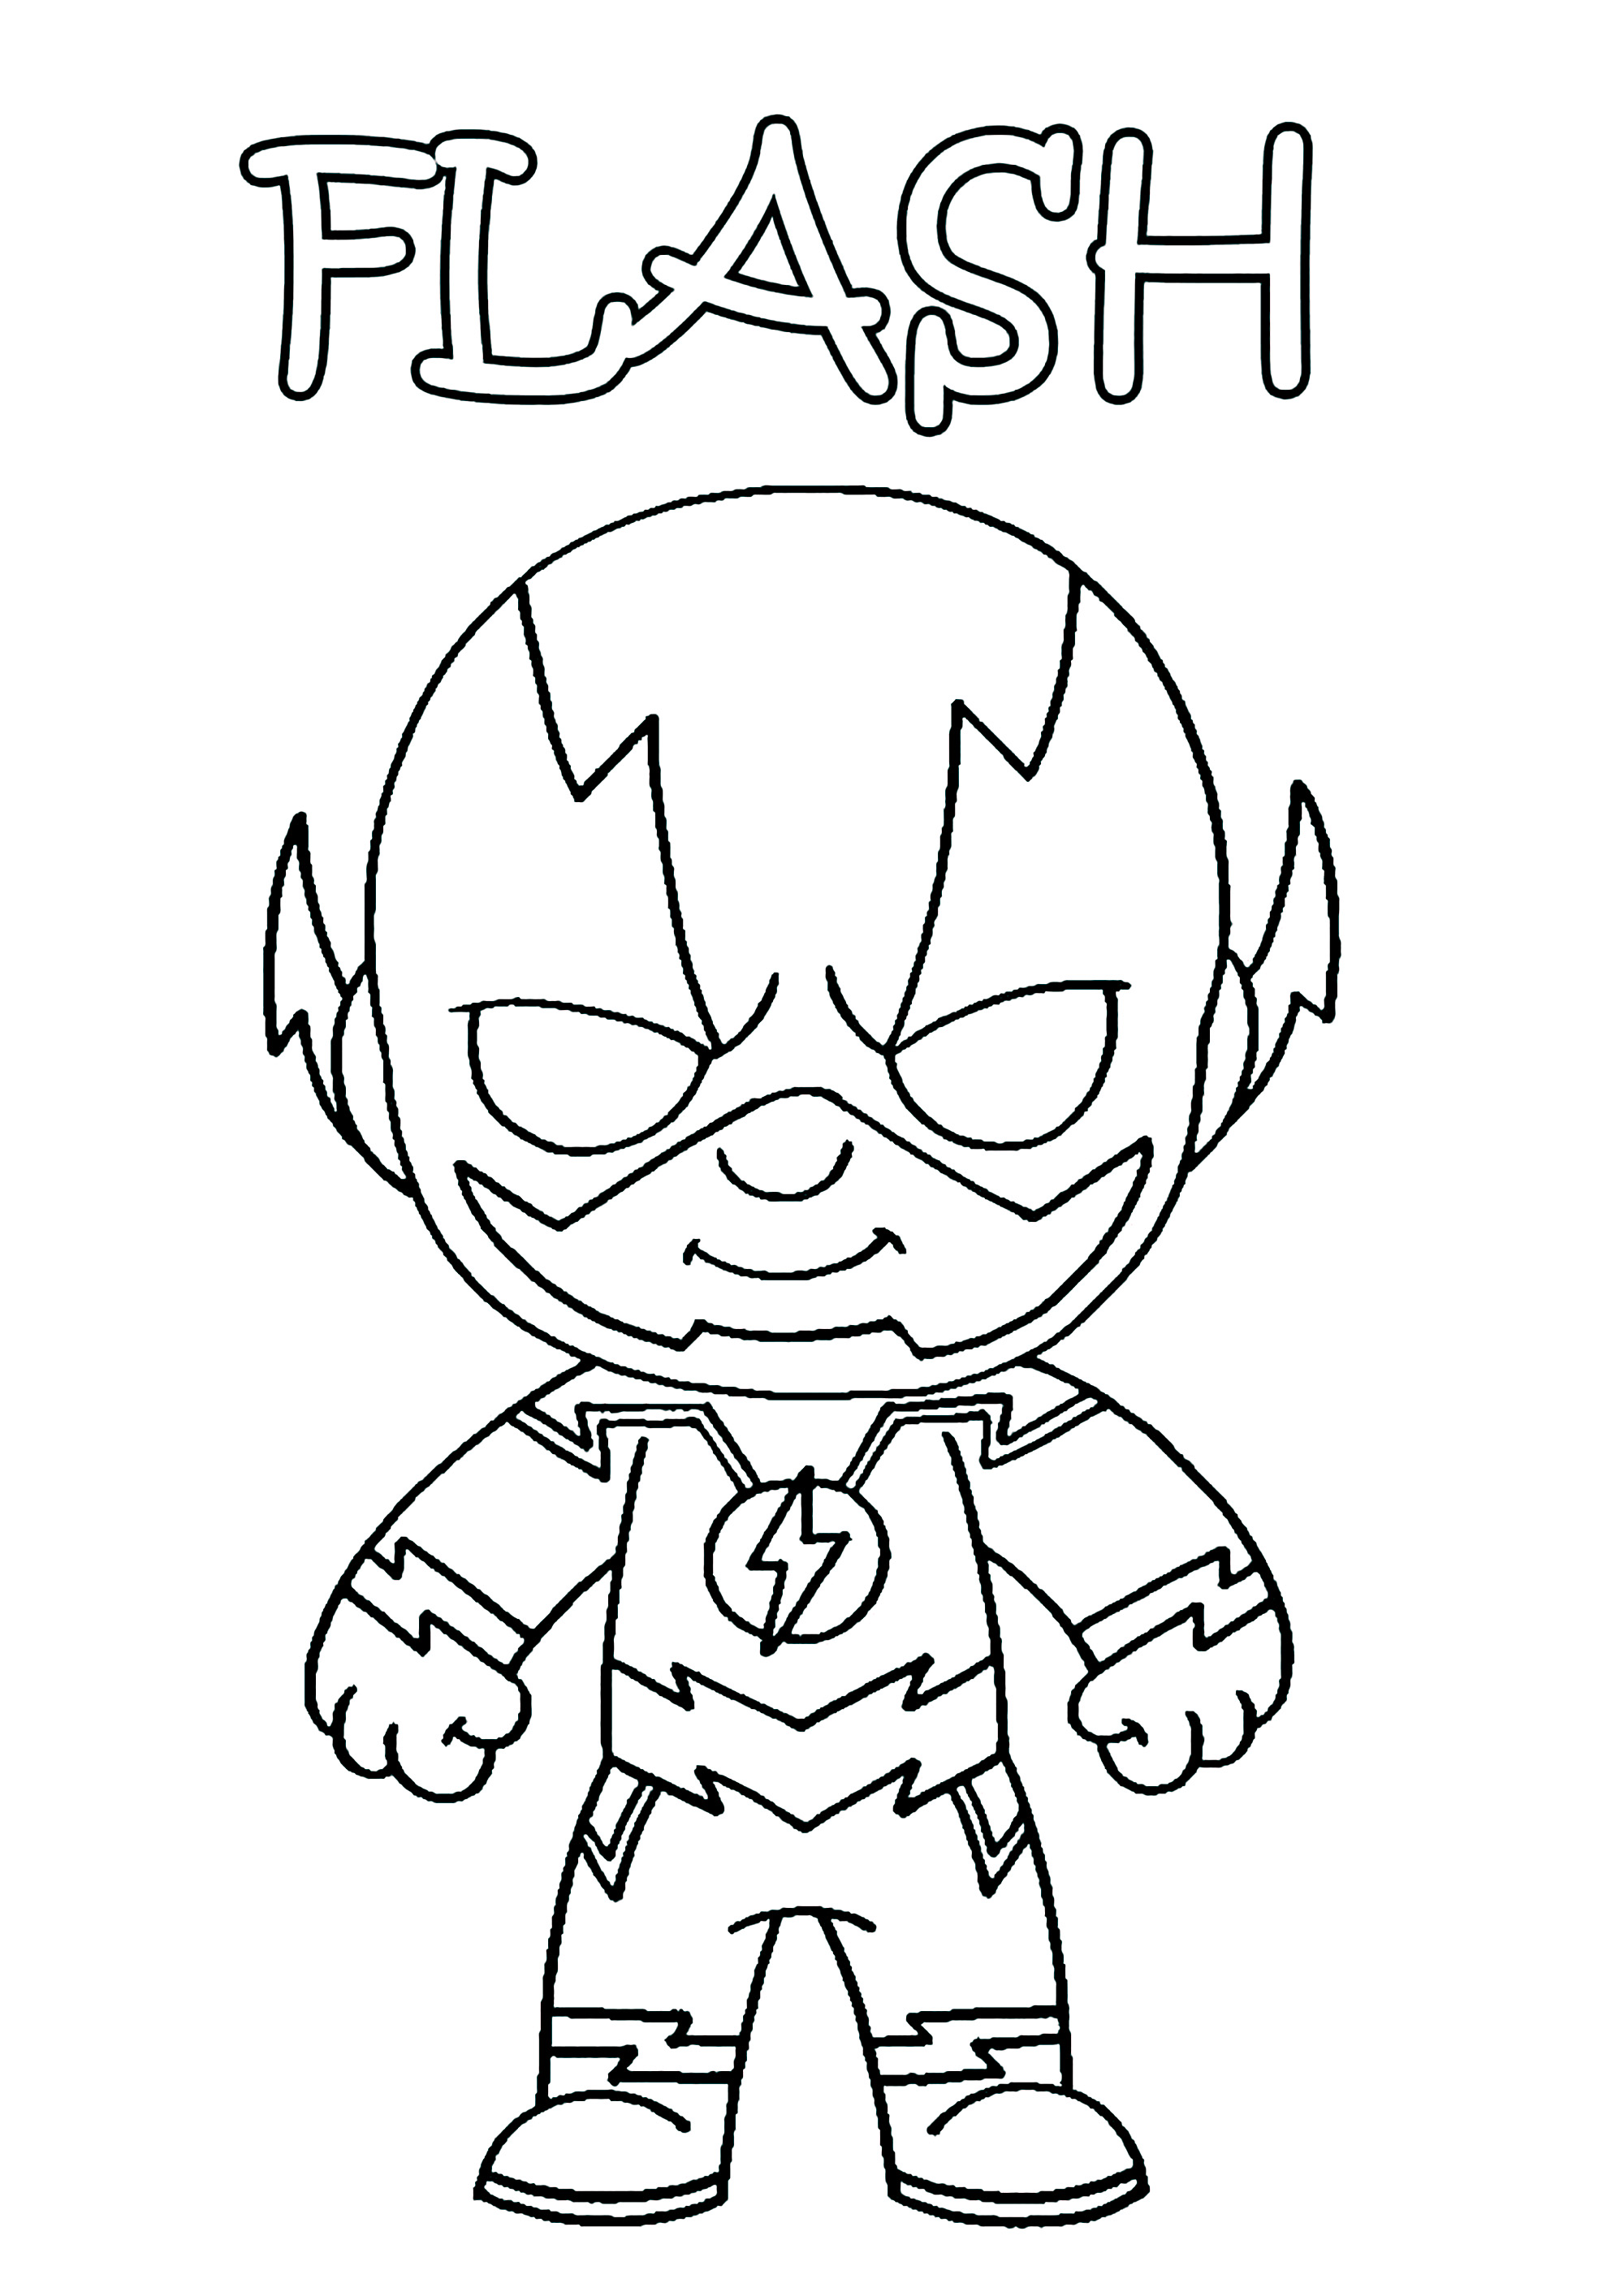 Flash coloring page to download